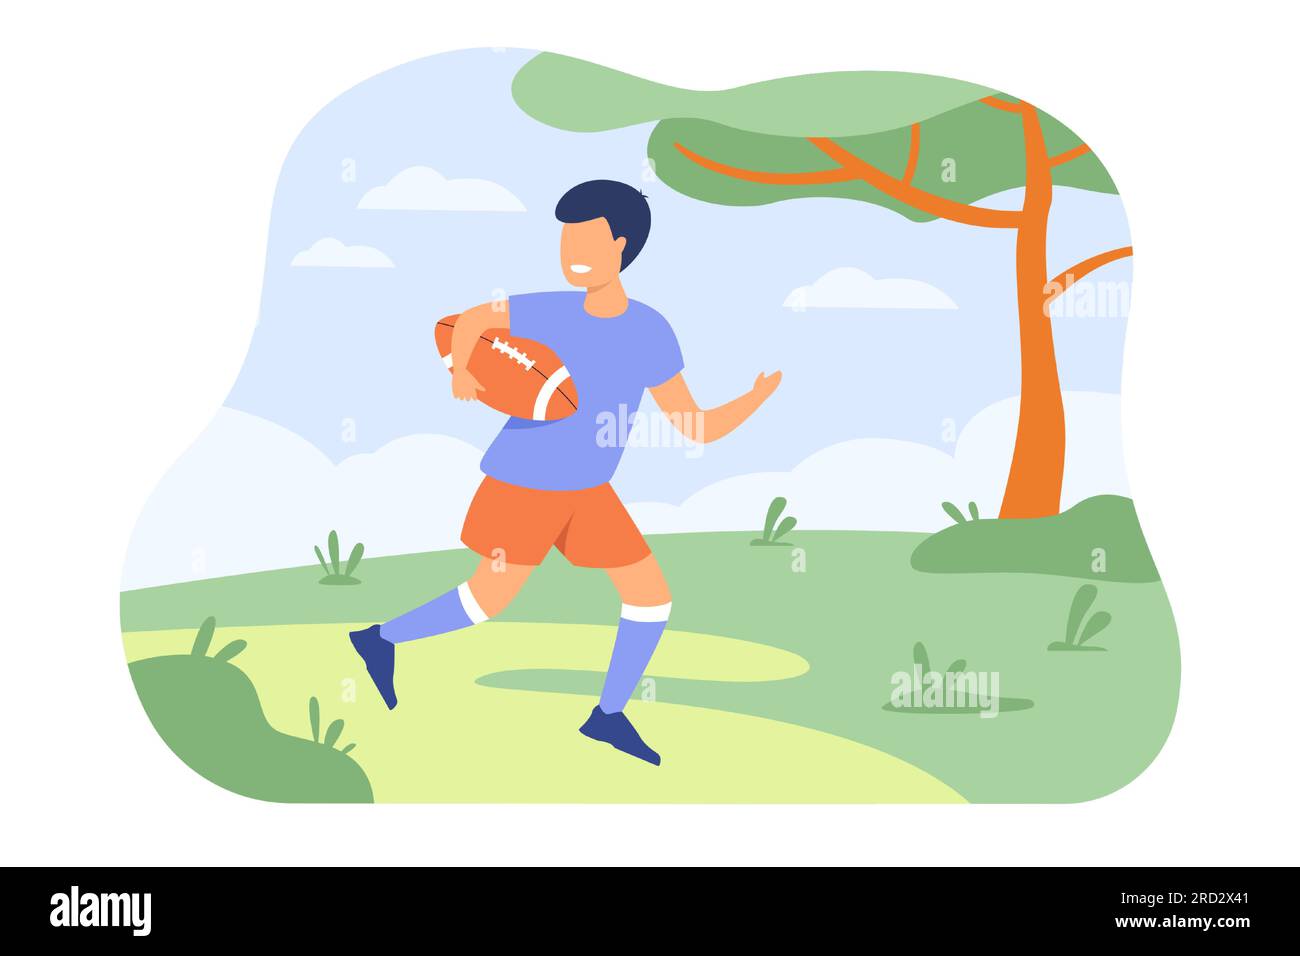 Cheerful young boy playing rugby game Stock Vector